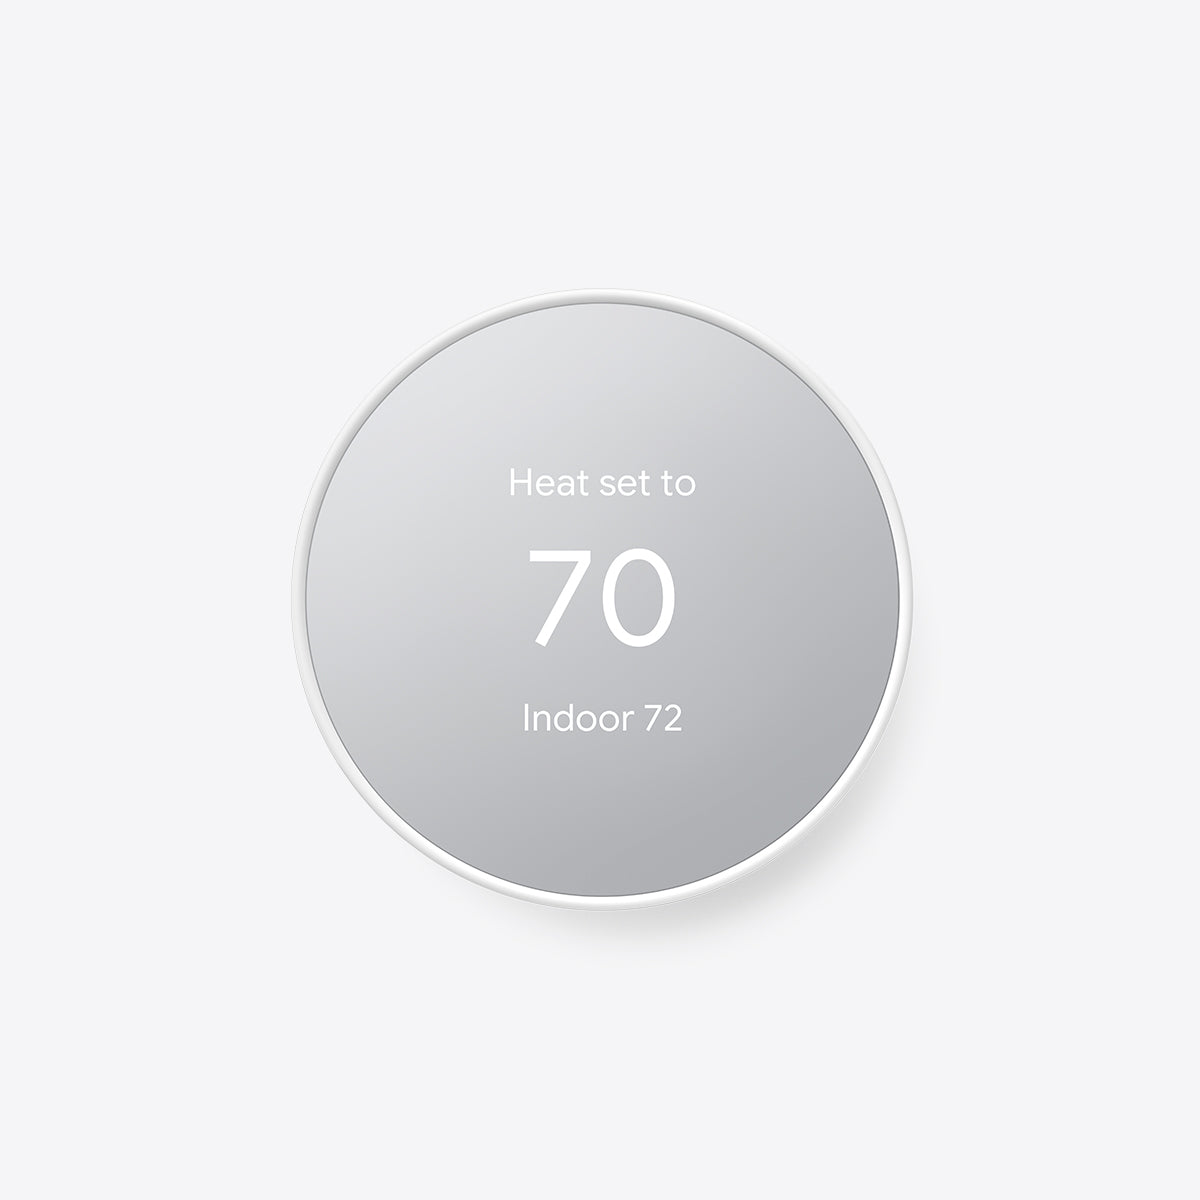 Nest Thermostat, Fine-tune your comfort - Google Store